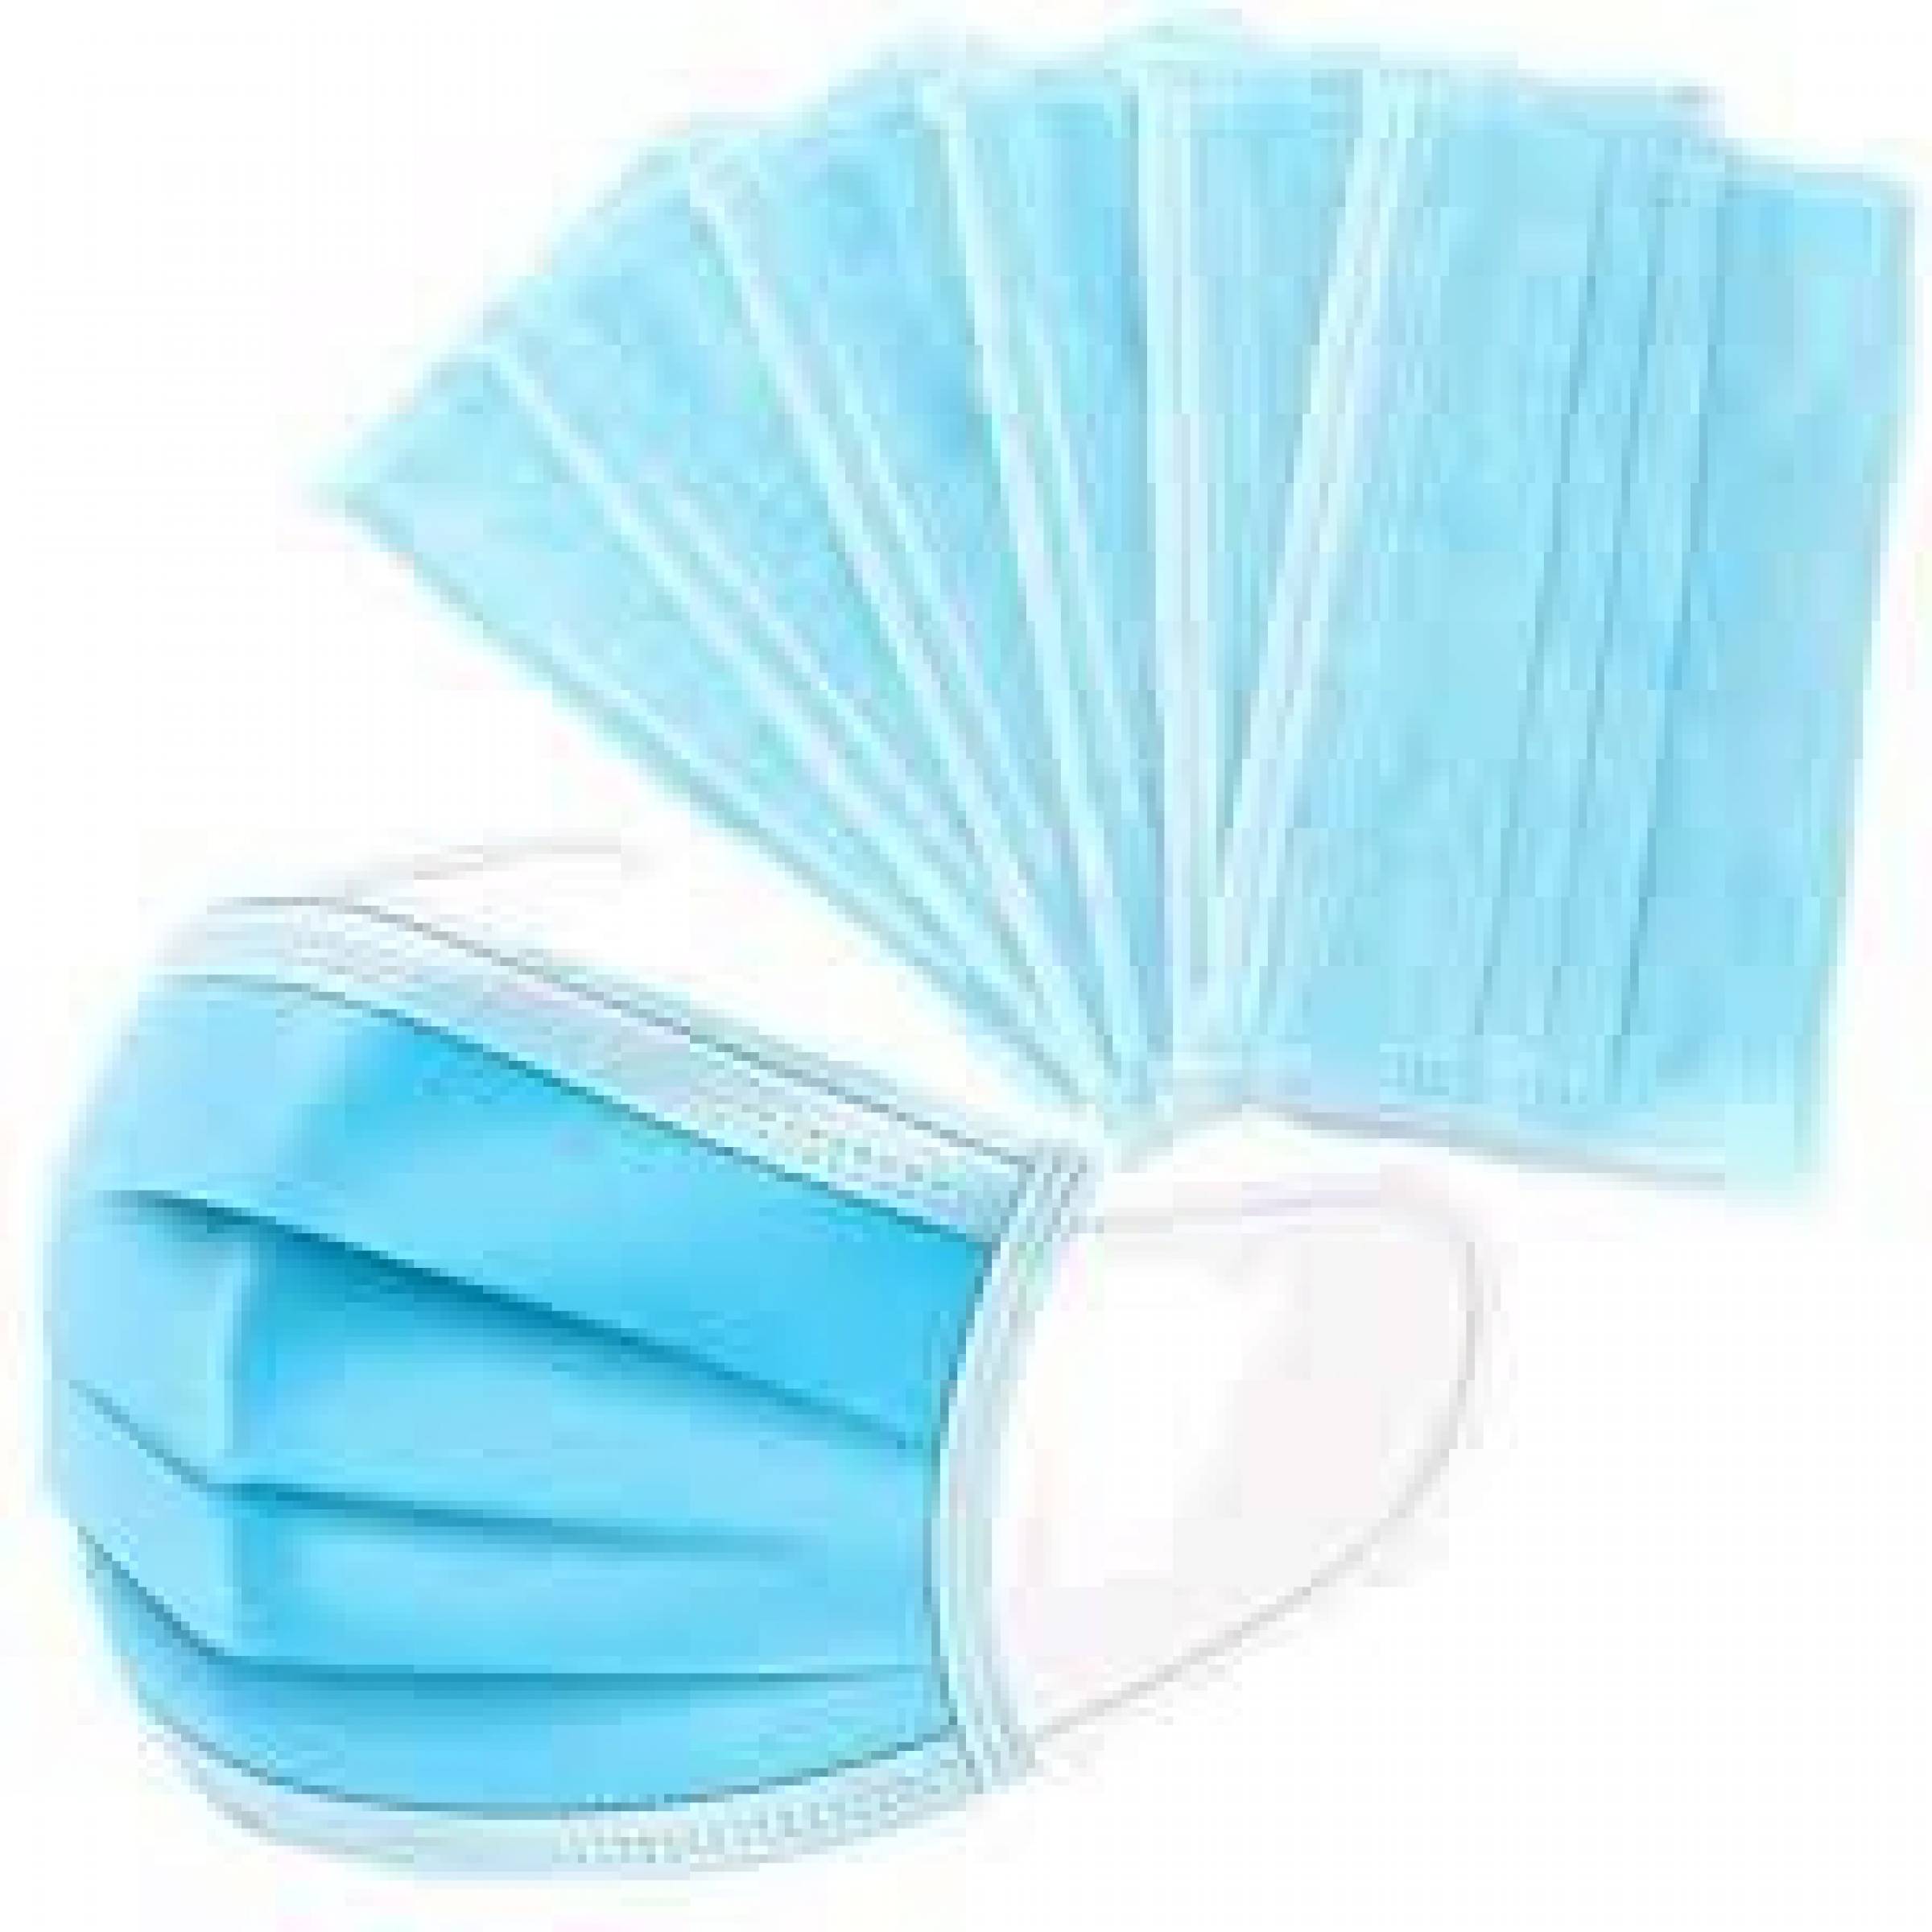 BLUE FACE MASK 3 Ply - 50 PCS - with BOX - NON MEDICAL ADULT - 3 LAYER